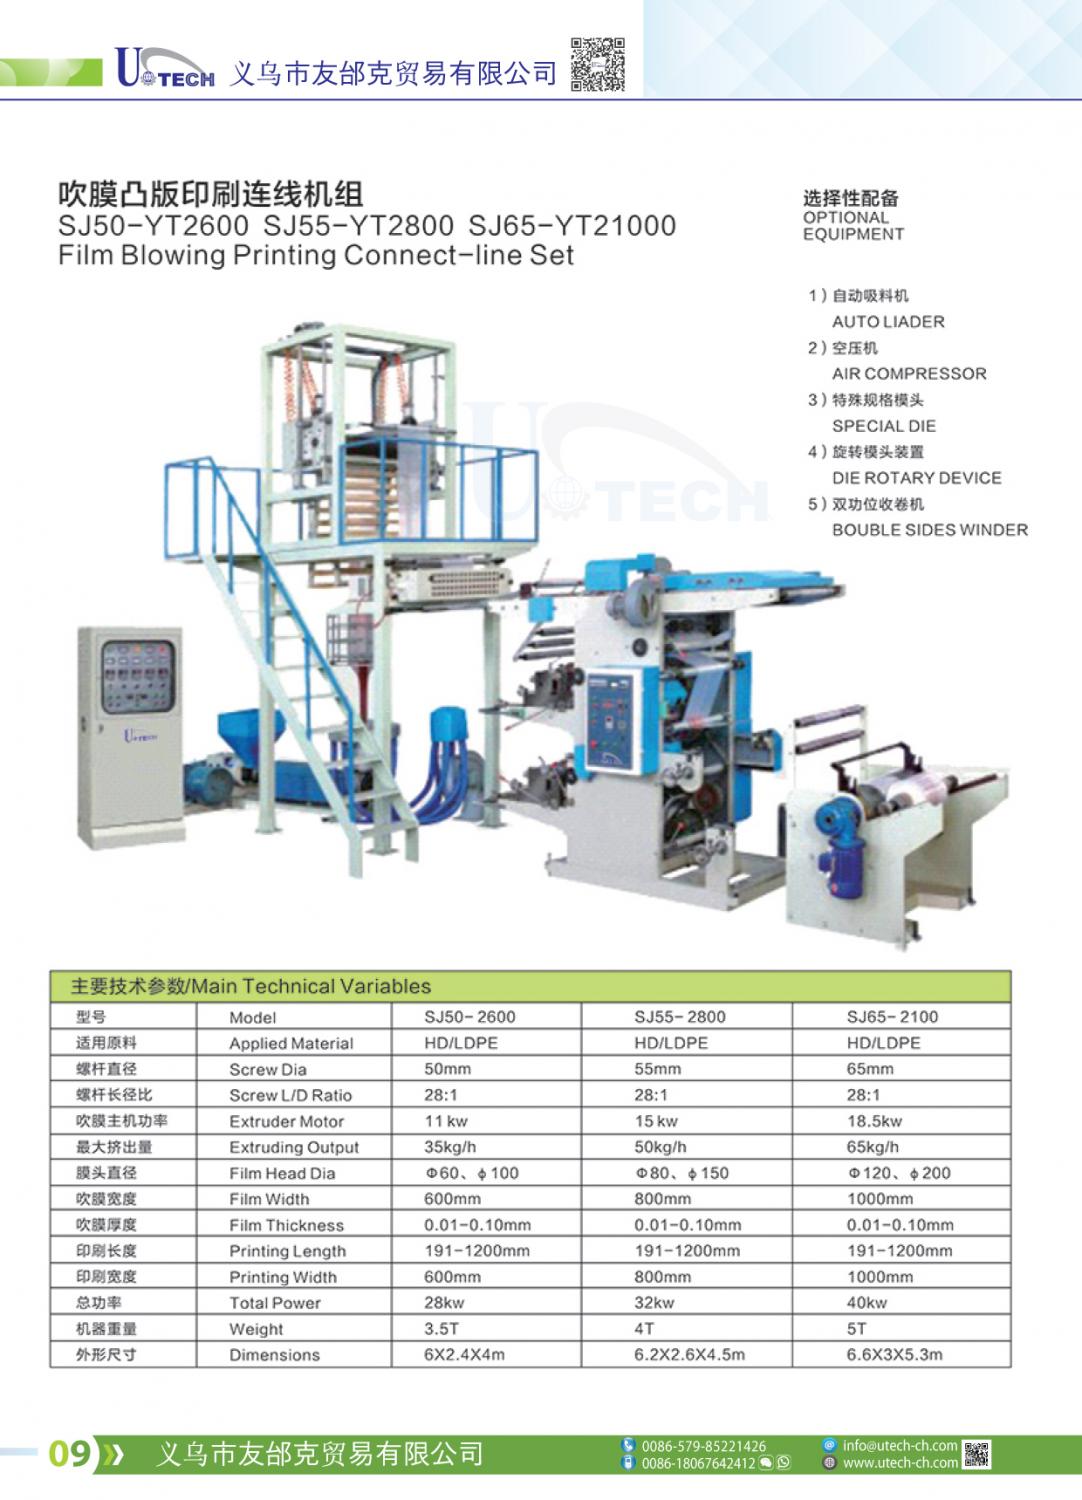 Film Blowing Printing Connect-line Set